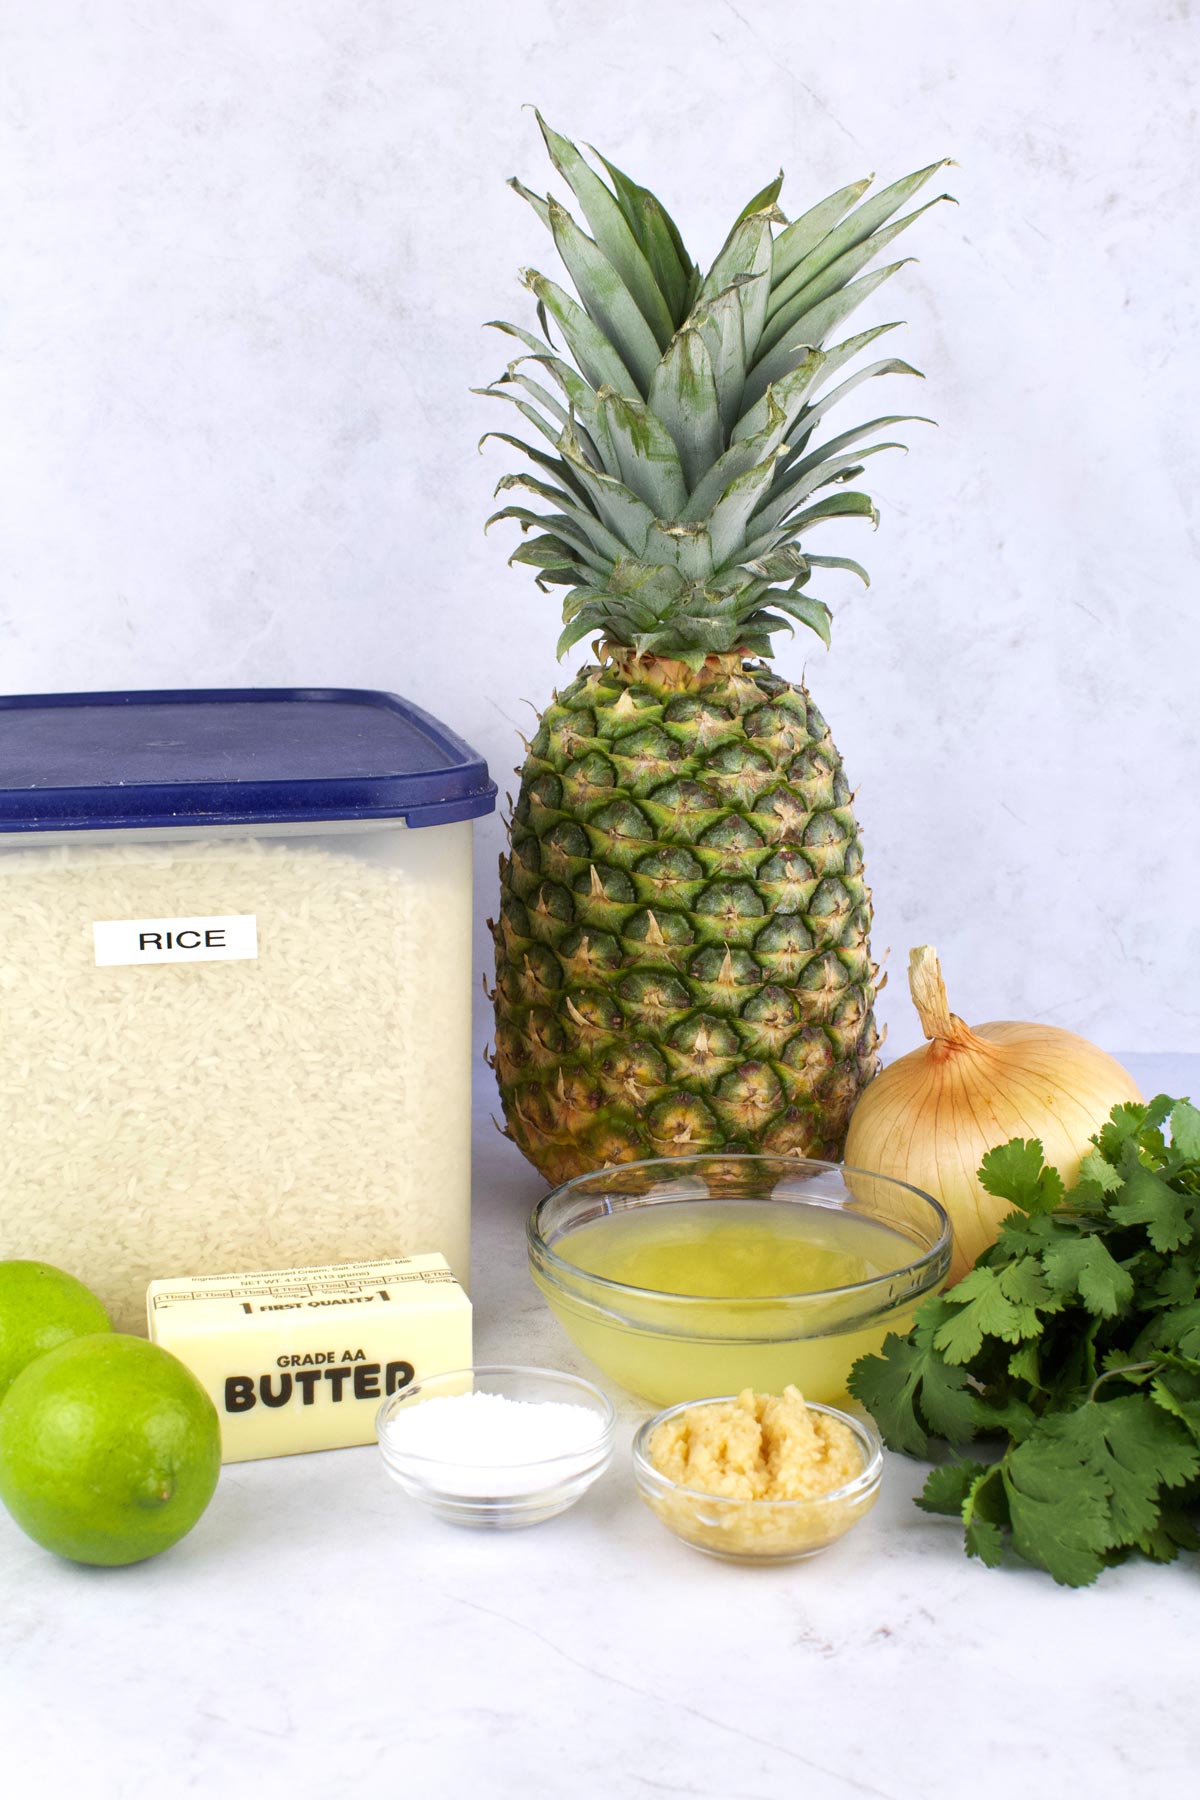 Pineapple, rice, limes, cilantro, and other ingredients on white counter top.